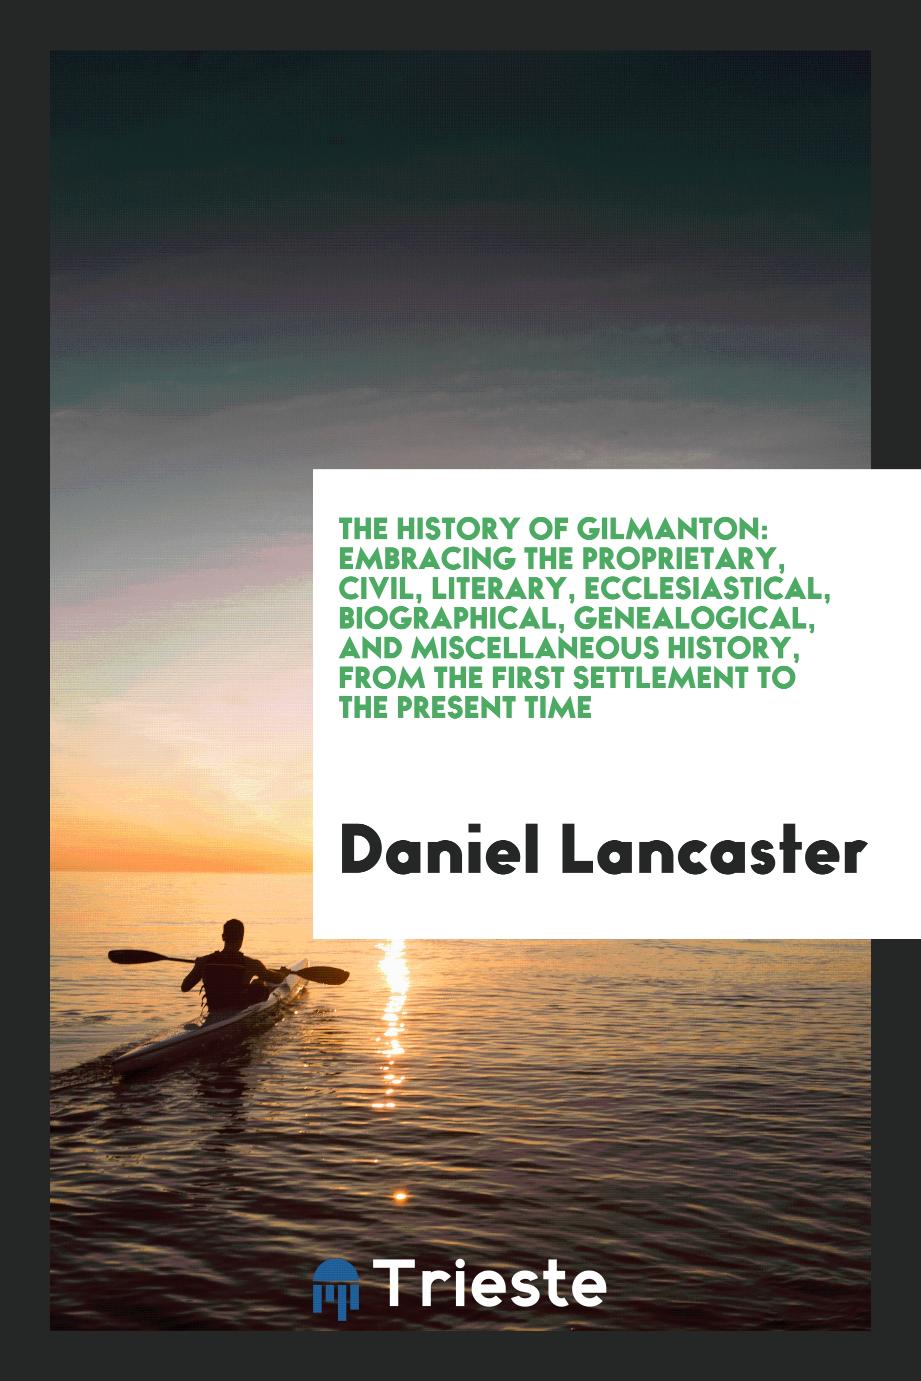 The History of Gilmanton: Embracing the Proprietary, Civil, Literary, Ecclesiastical, Biographical, Genealogical, and Miscellaneous History, from the First Settlement to the Present Time